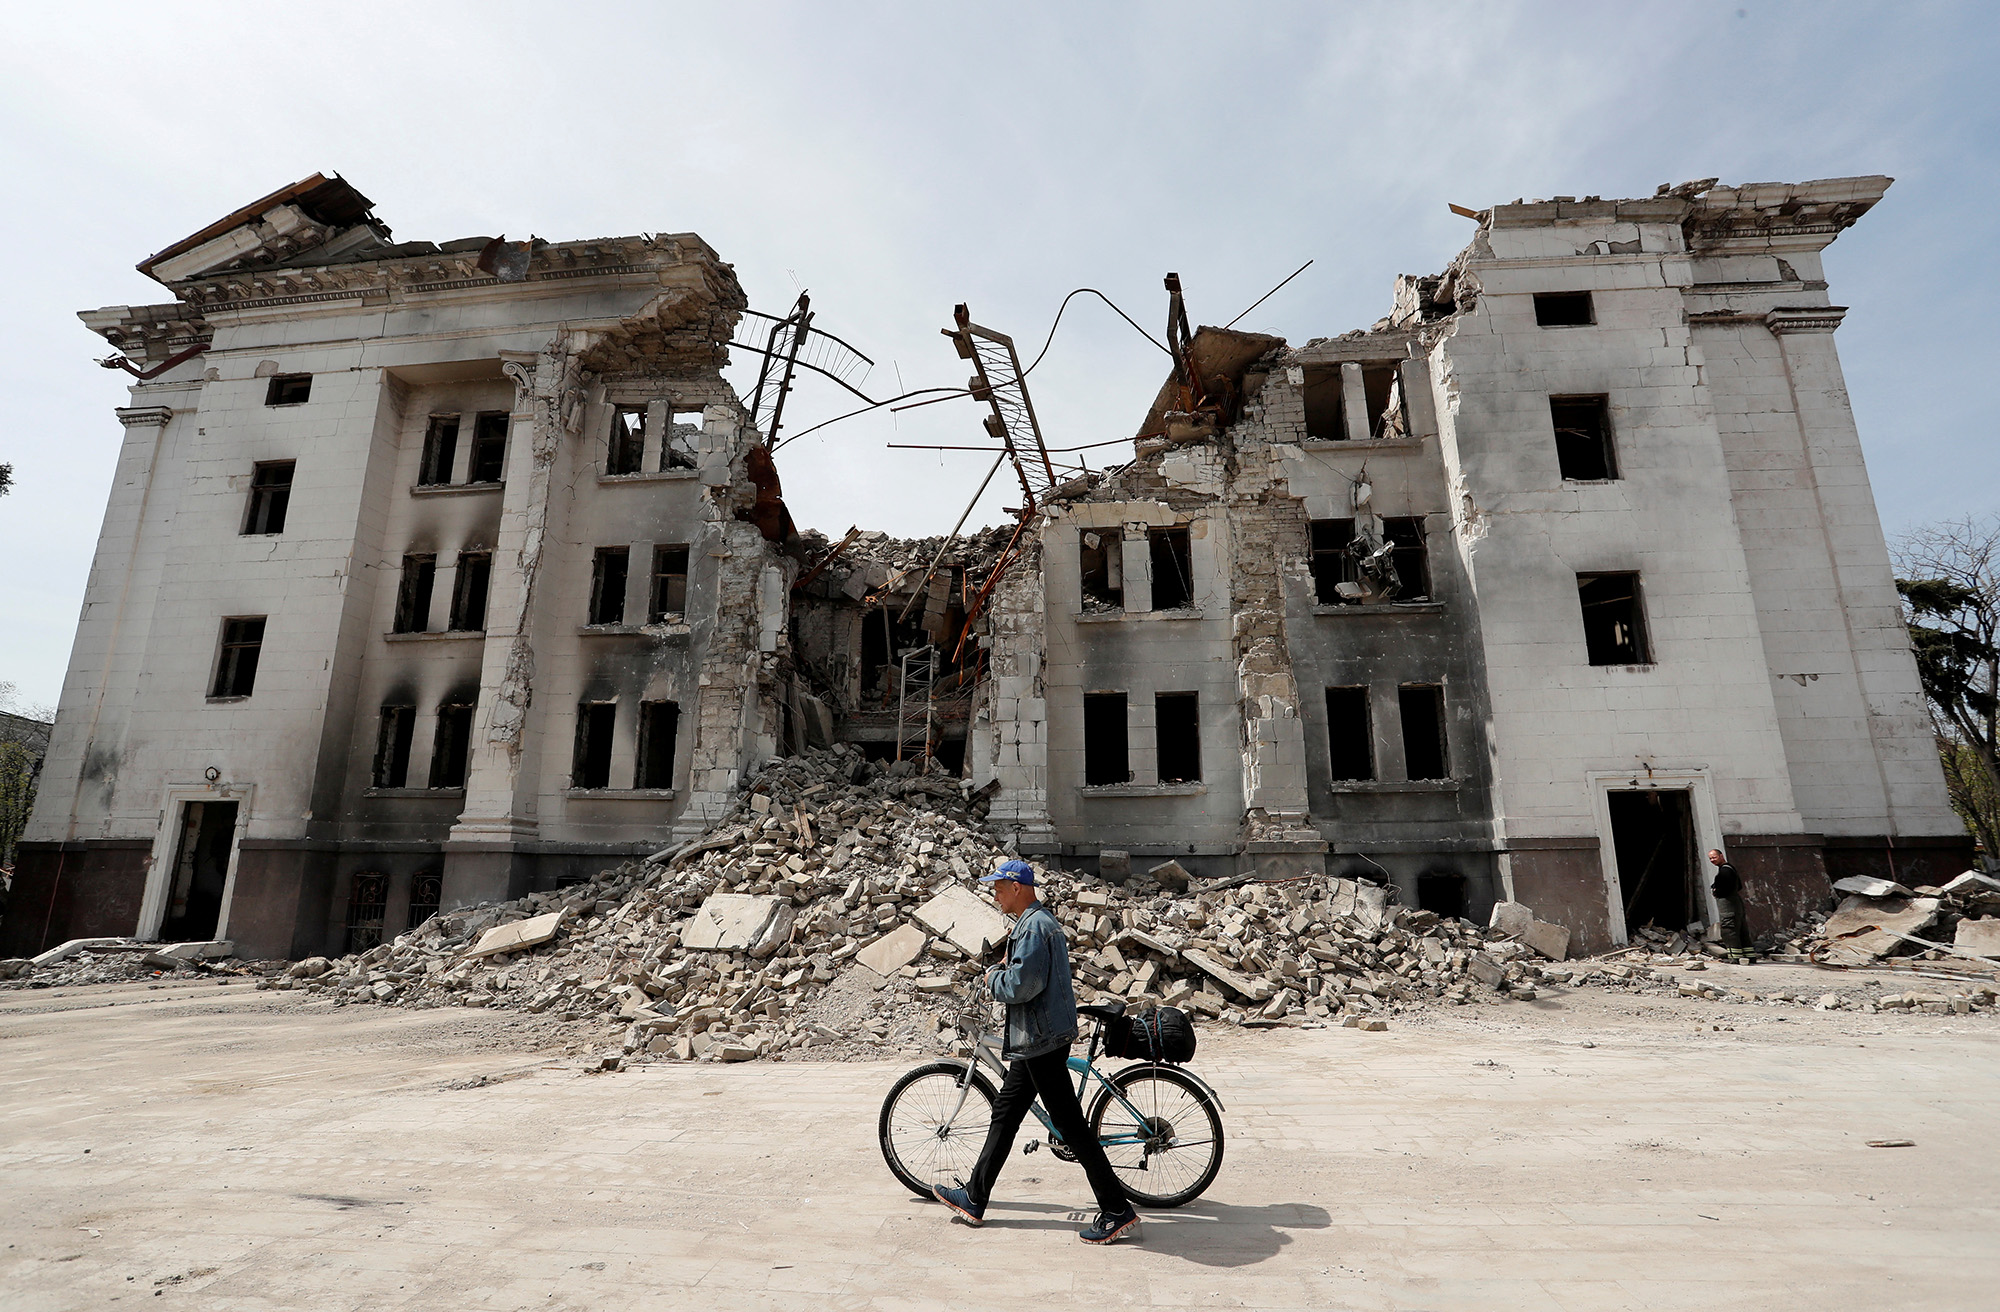 The destroyed Mariupol theatre building in the southern port city of Mariupol, Ukraine, on April 25, 2022.